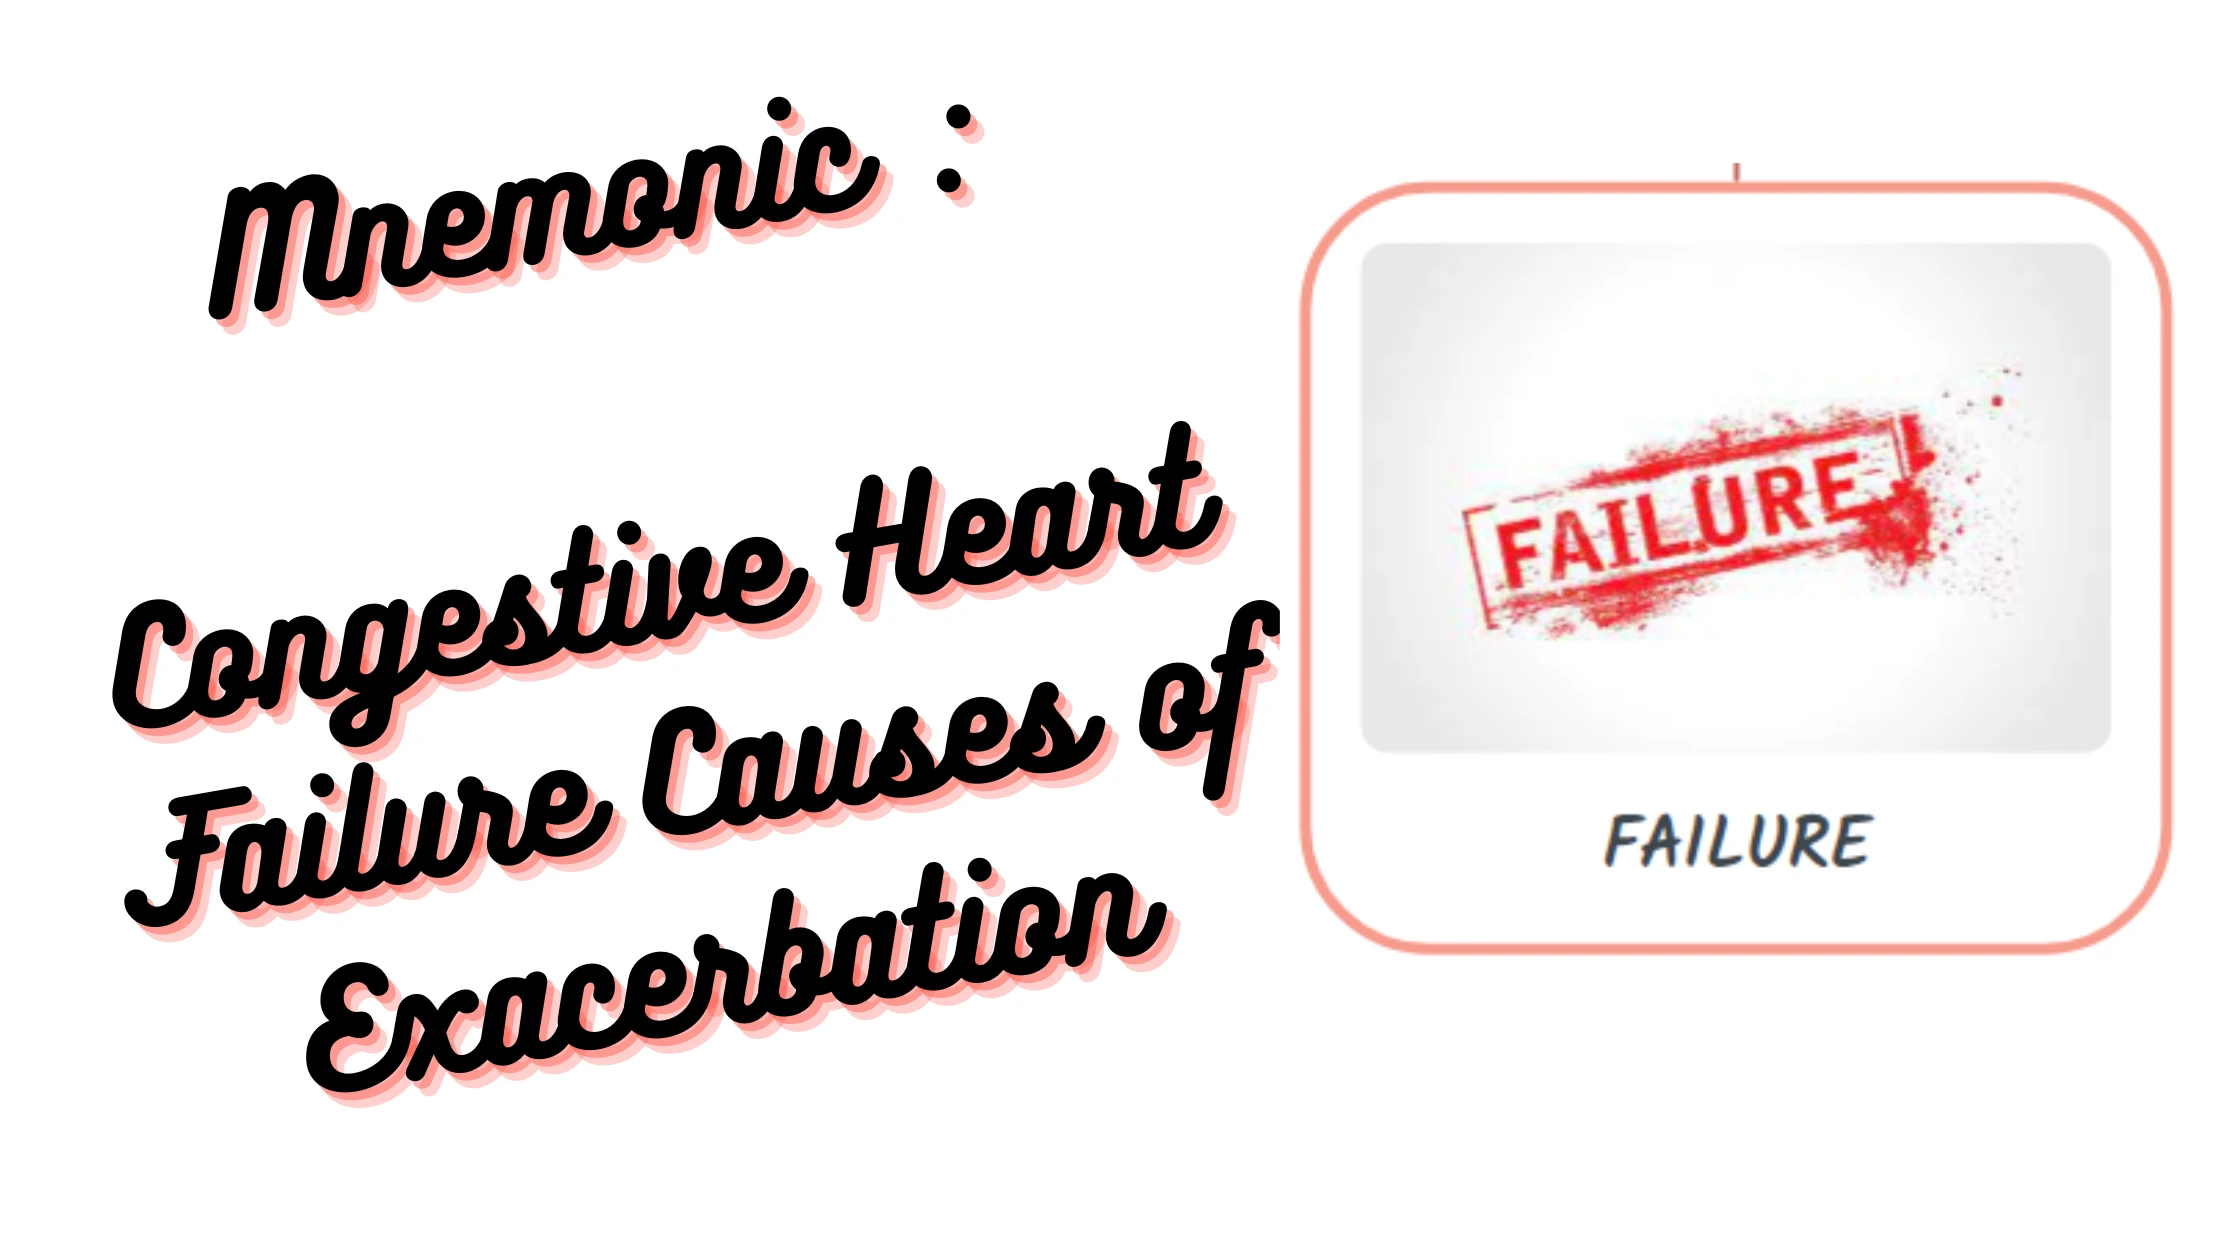 You are currently viewing [Very Cool] Mnemonic : Congestive Heart Failure Causes of Exacerbation